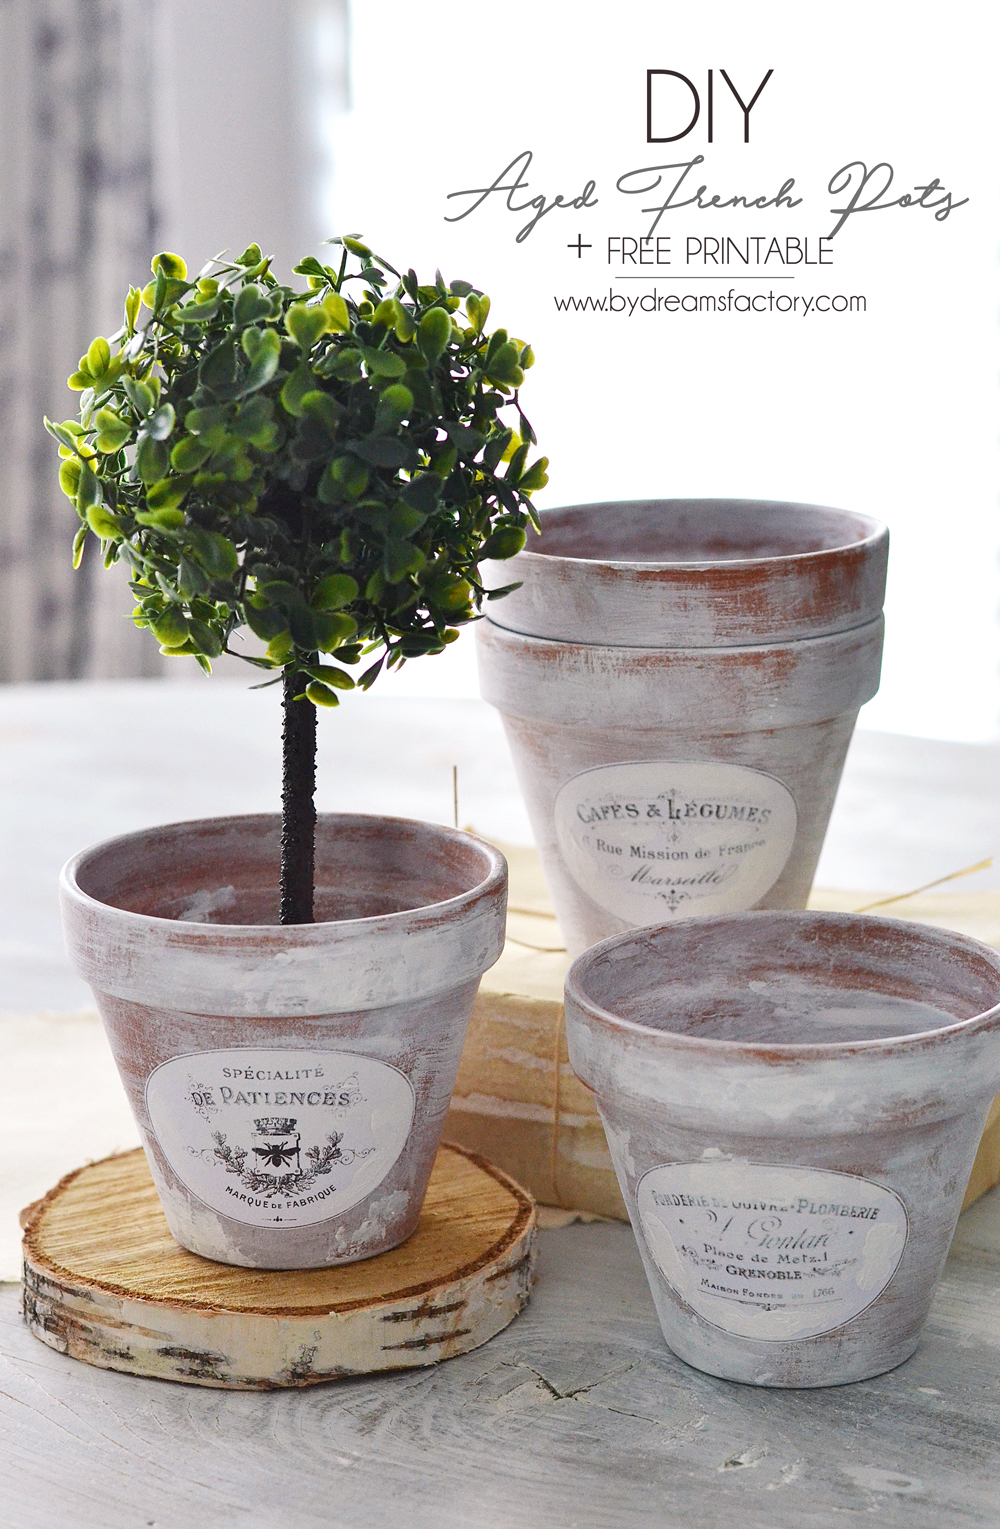 DIY Aged French Terracotta Pots